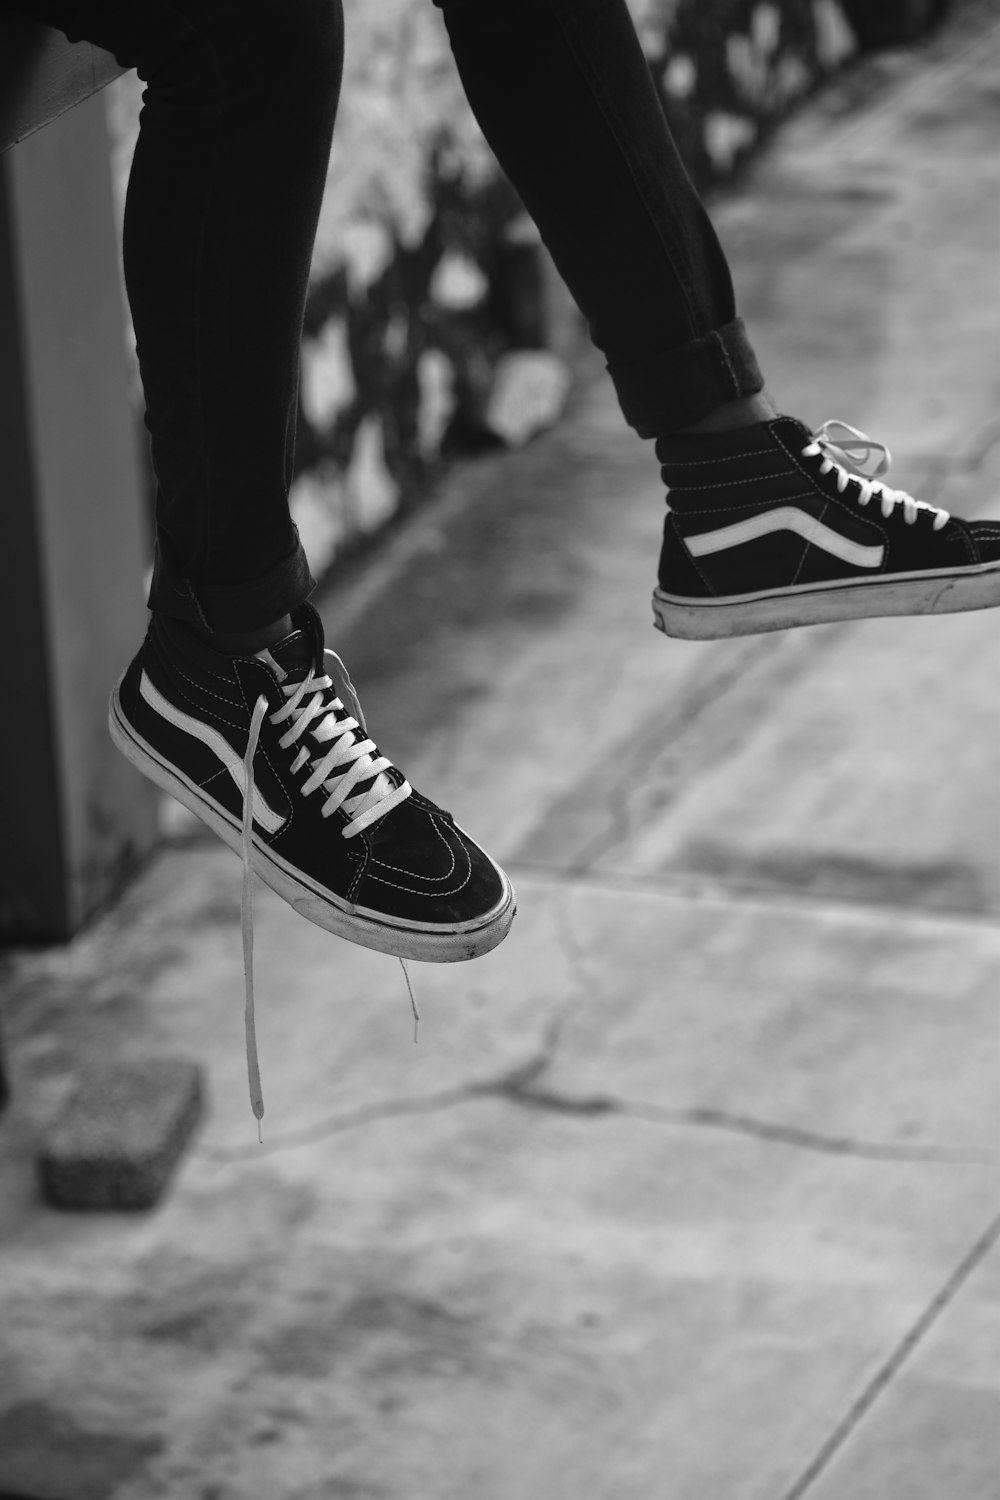 person wearing black and white vans low top sneakers